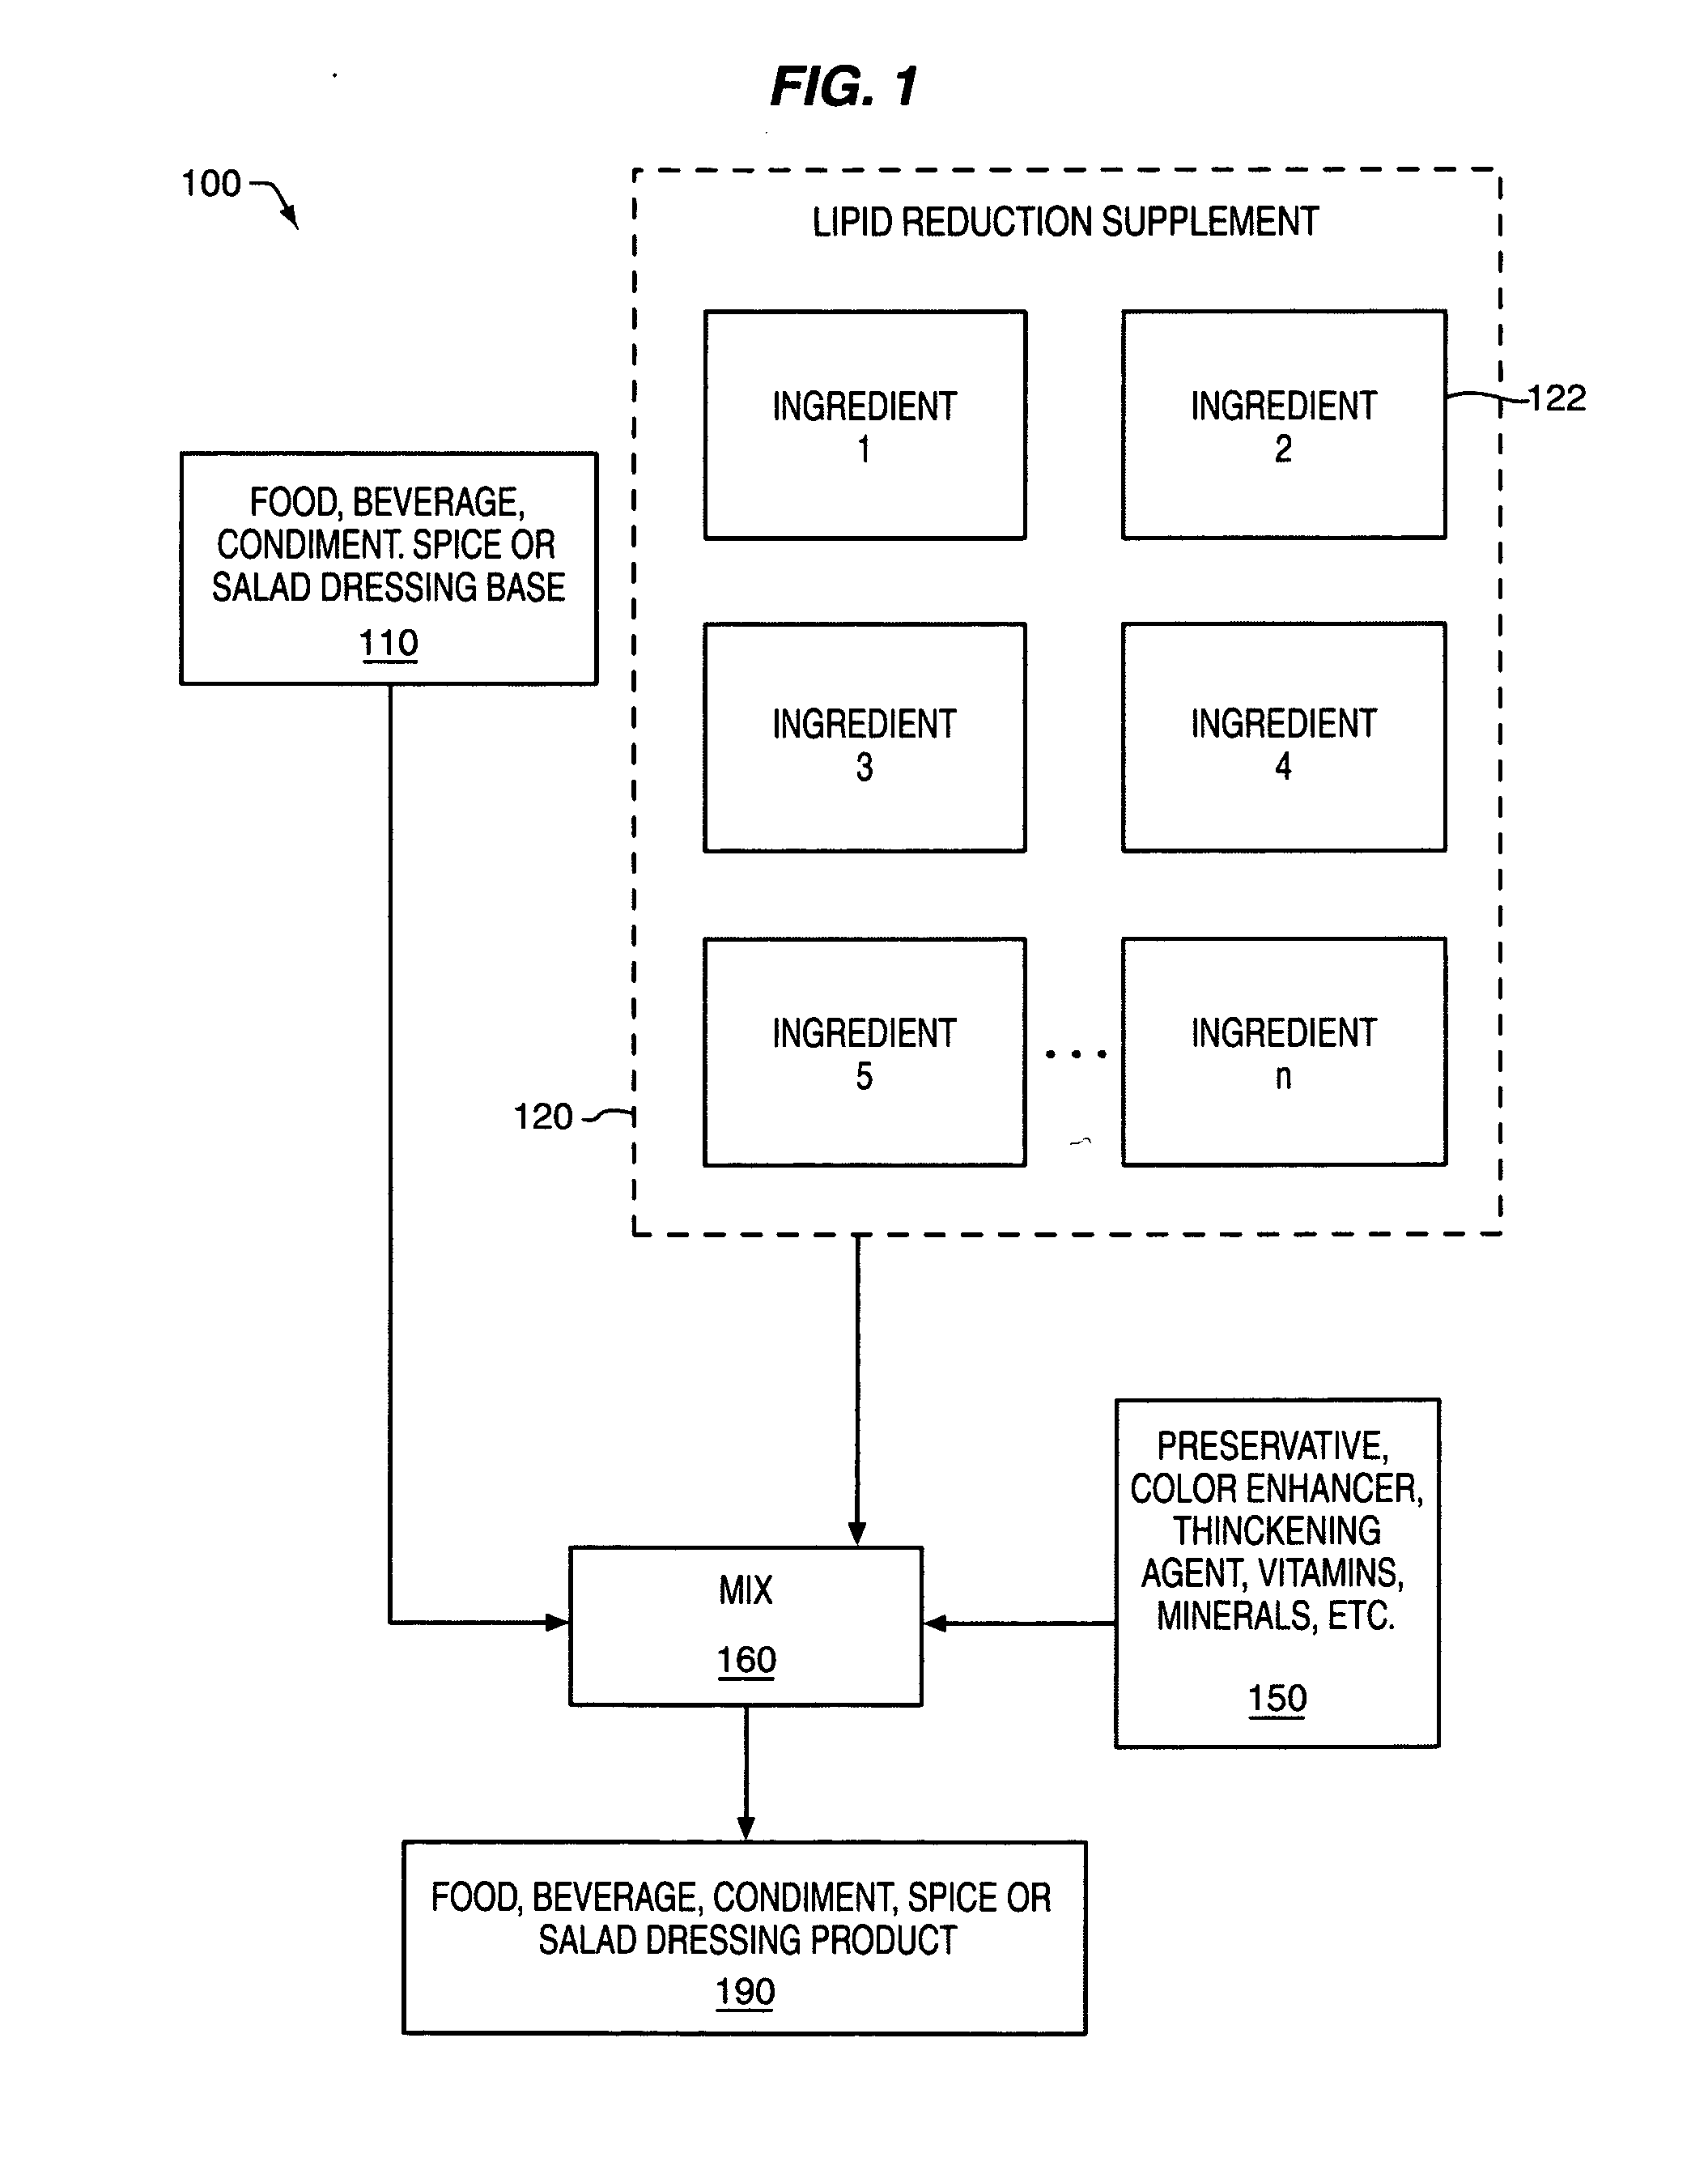 Composition and method for reducing lipid storage